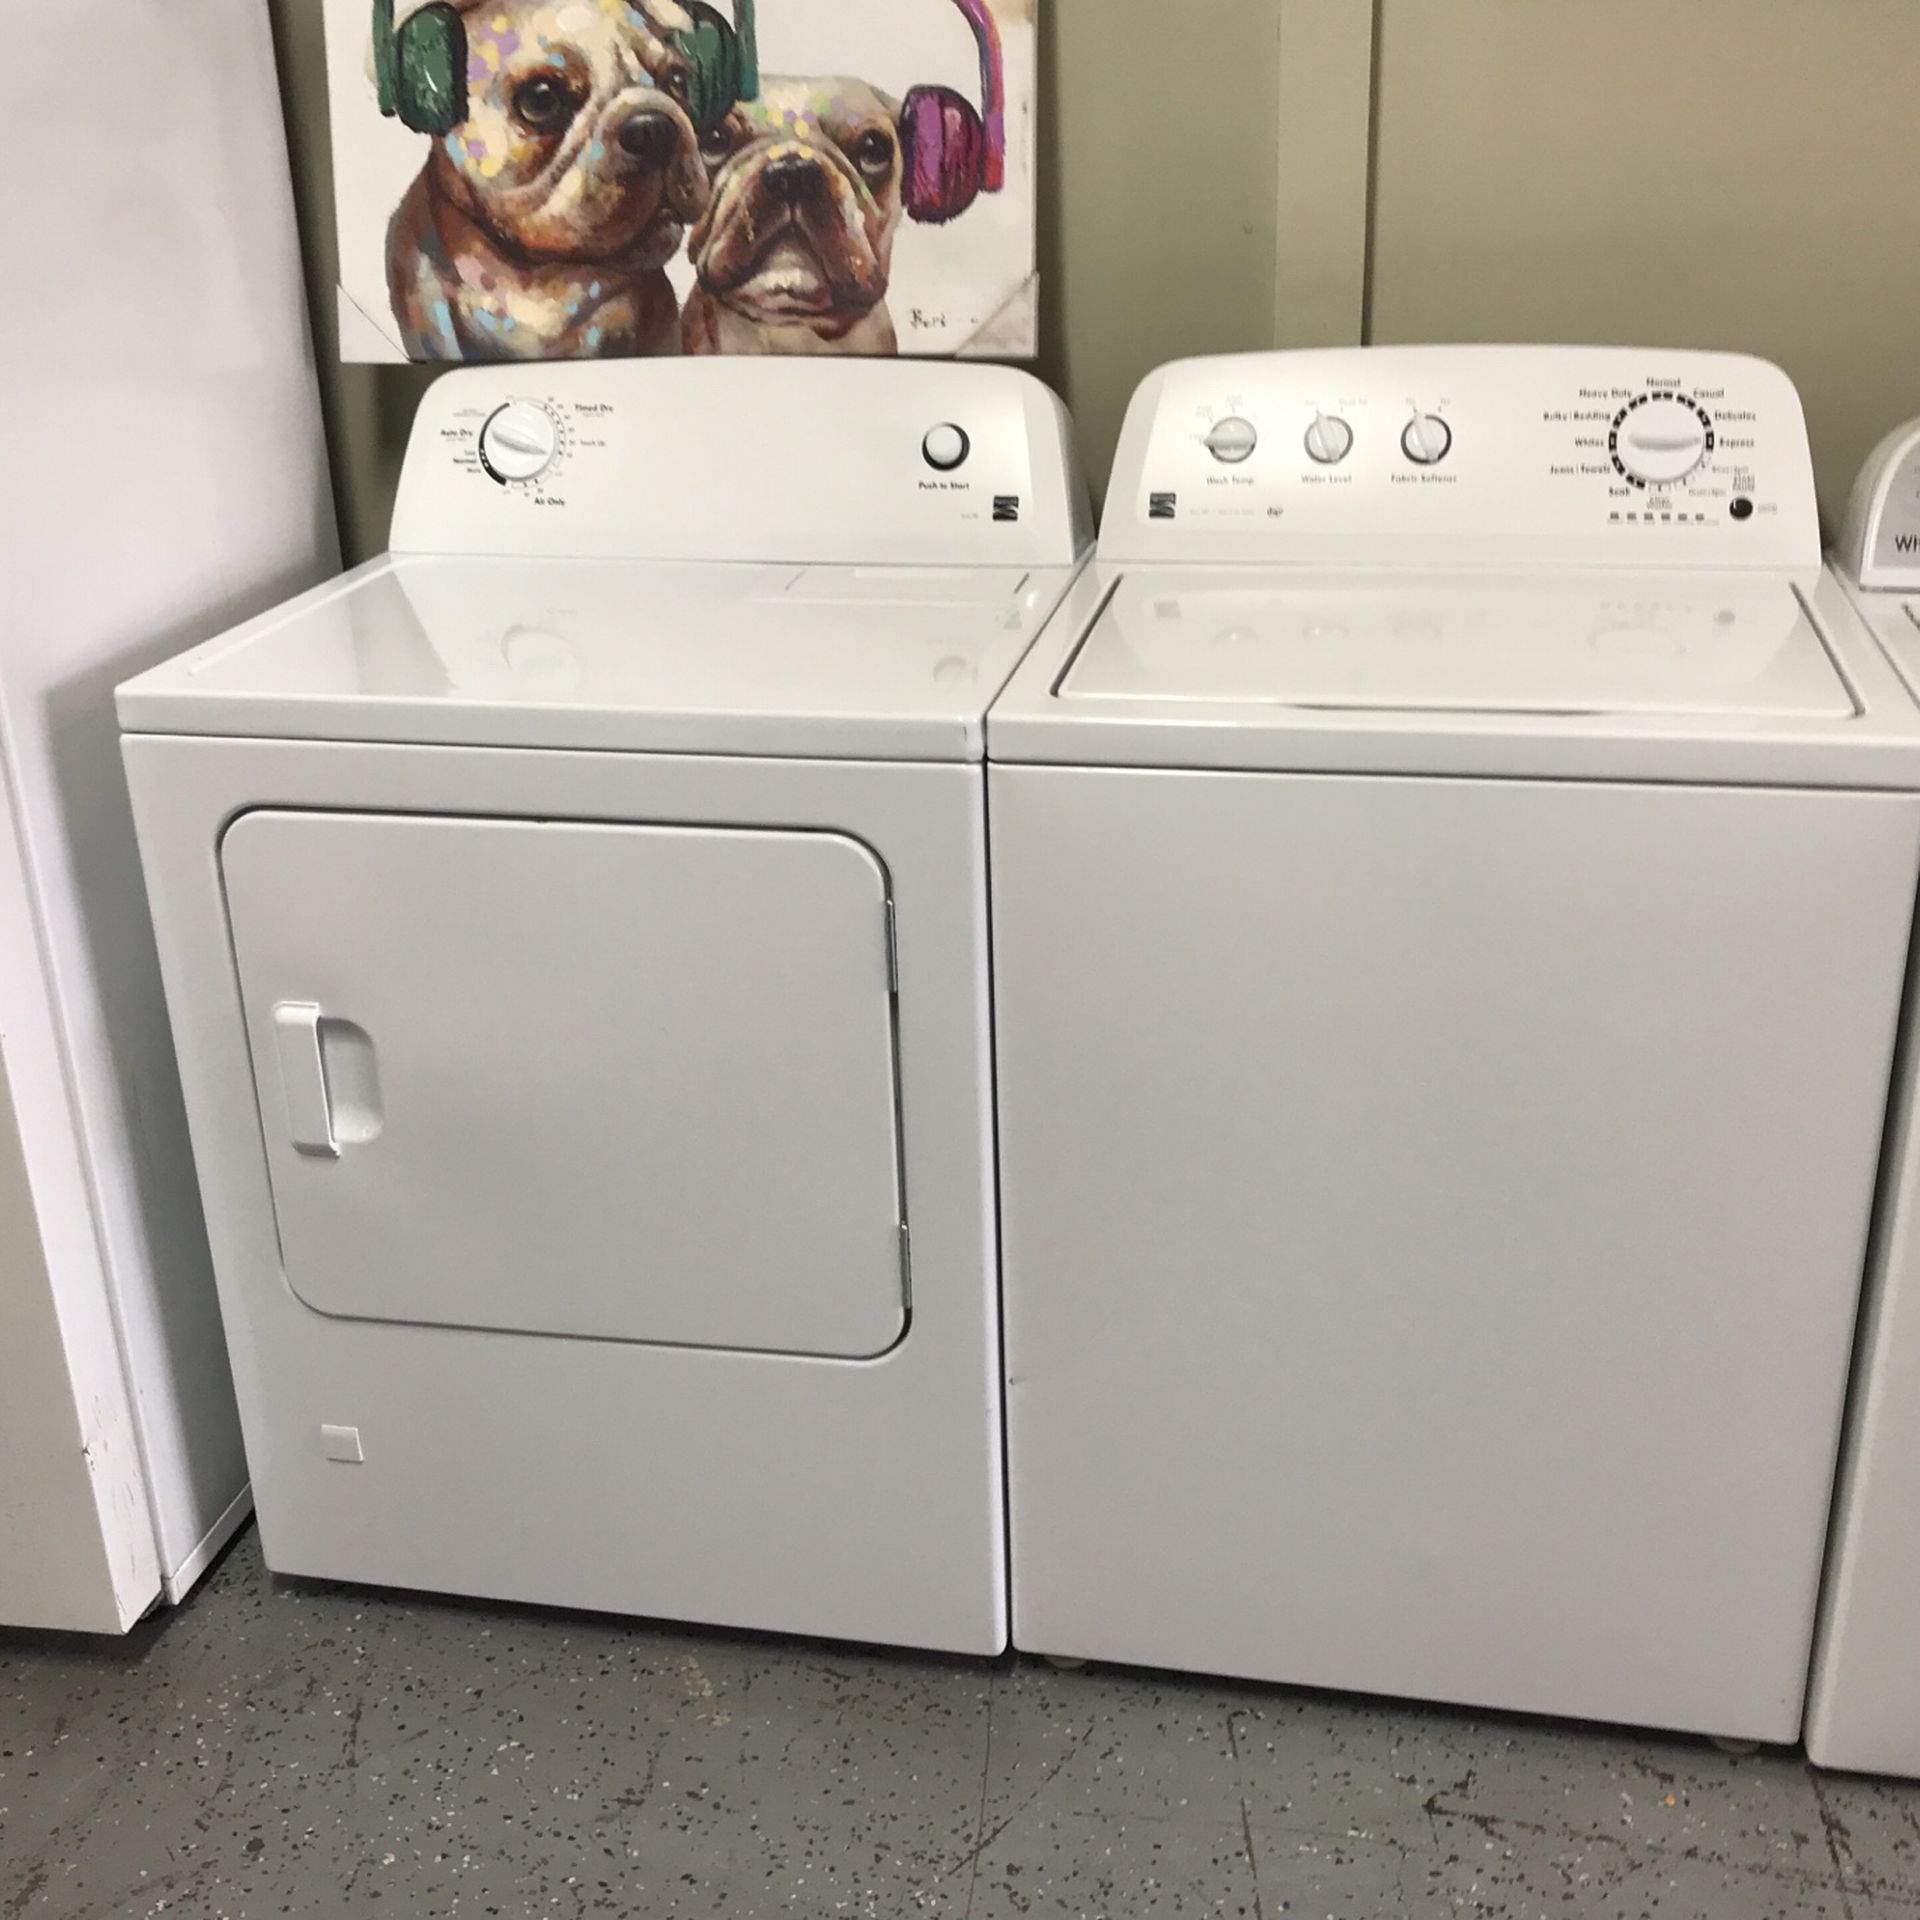 KENMORE HE TOP LOAD WASHER WITH AGITATOR AND GAS DRYER SET 